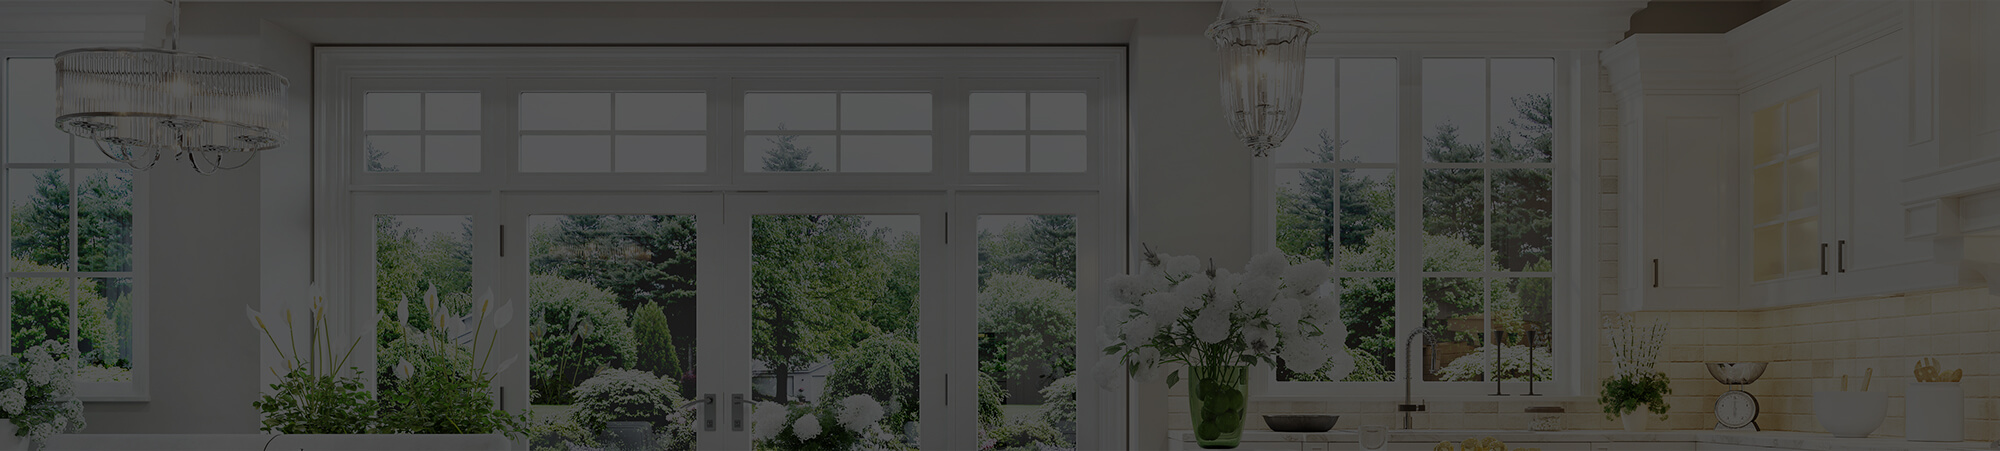 window installation and replacement services in suamico wi